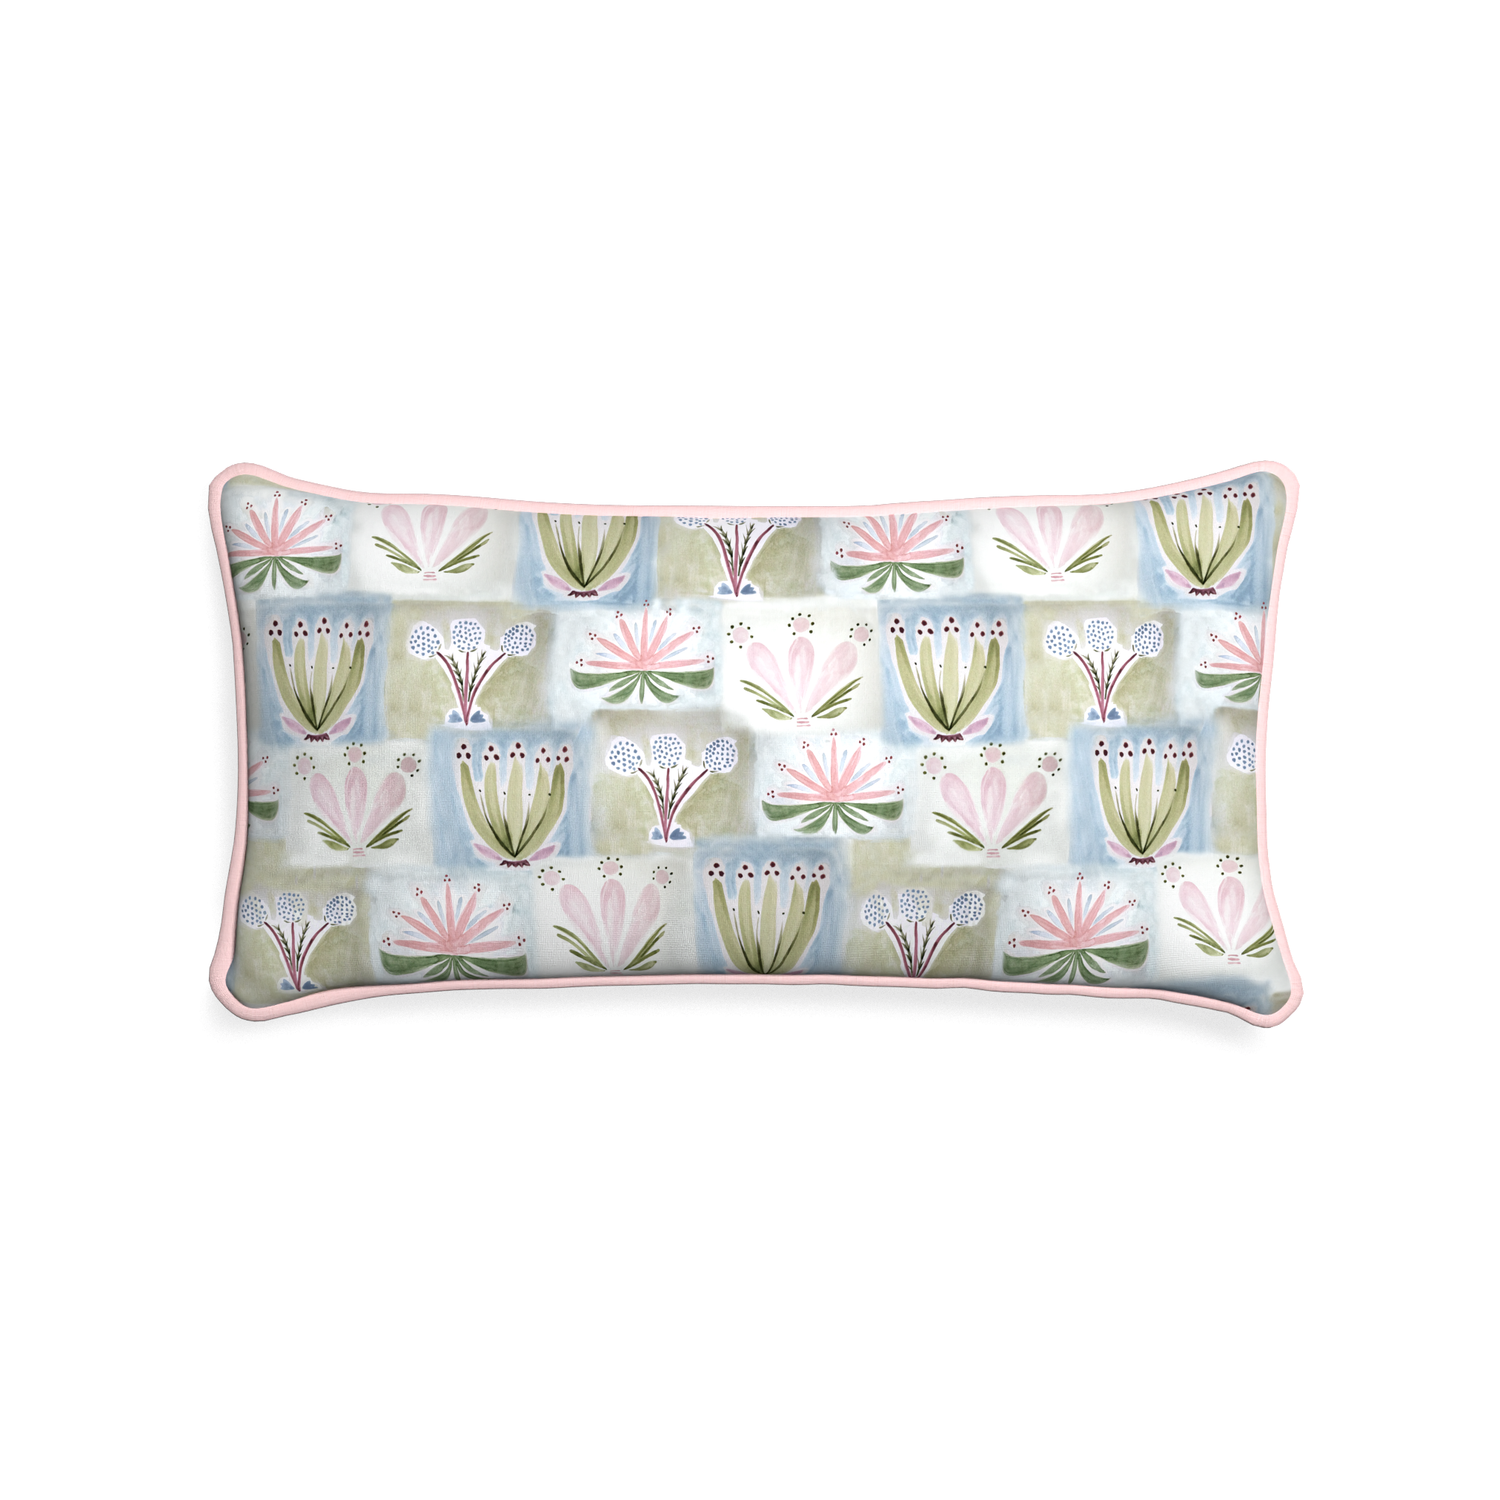 Midi-lumbar harper custom hand-painted floralpillow with petal piping on white background